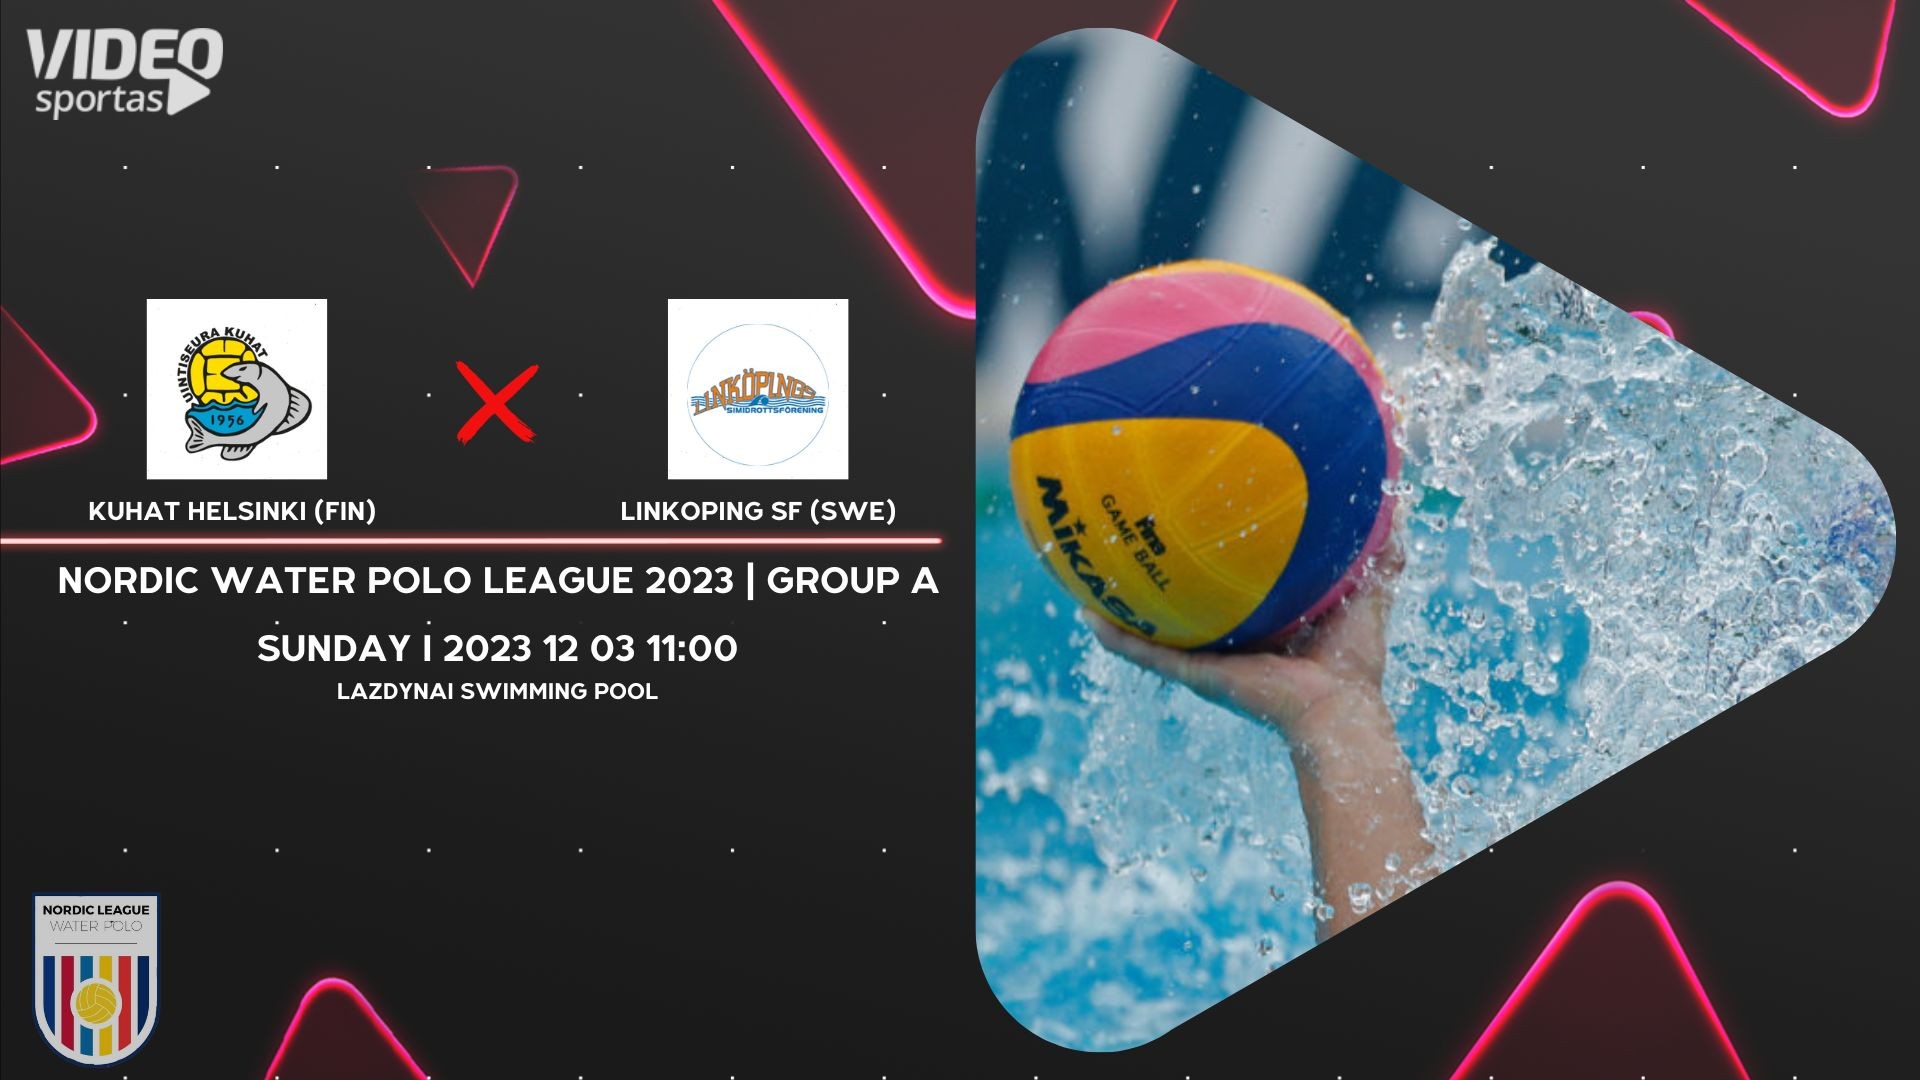 KUHAT HELSINKI x LINKOPING SF (NORDIC WATER POLO LEAGUE 2023 | Group A)